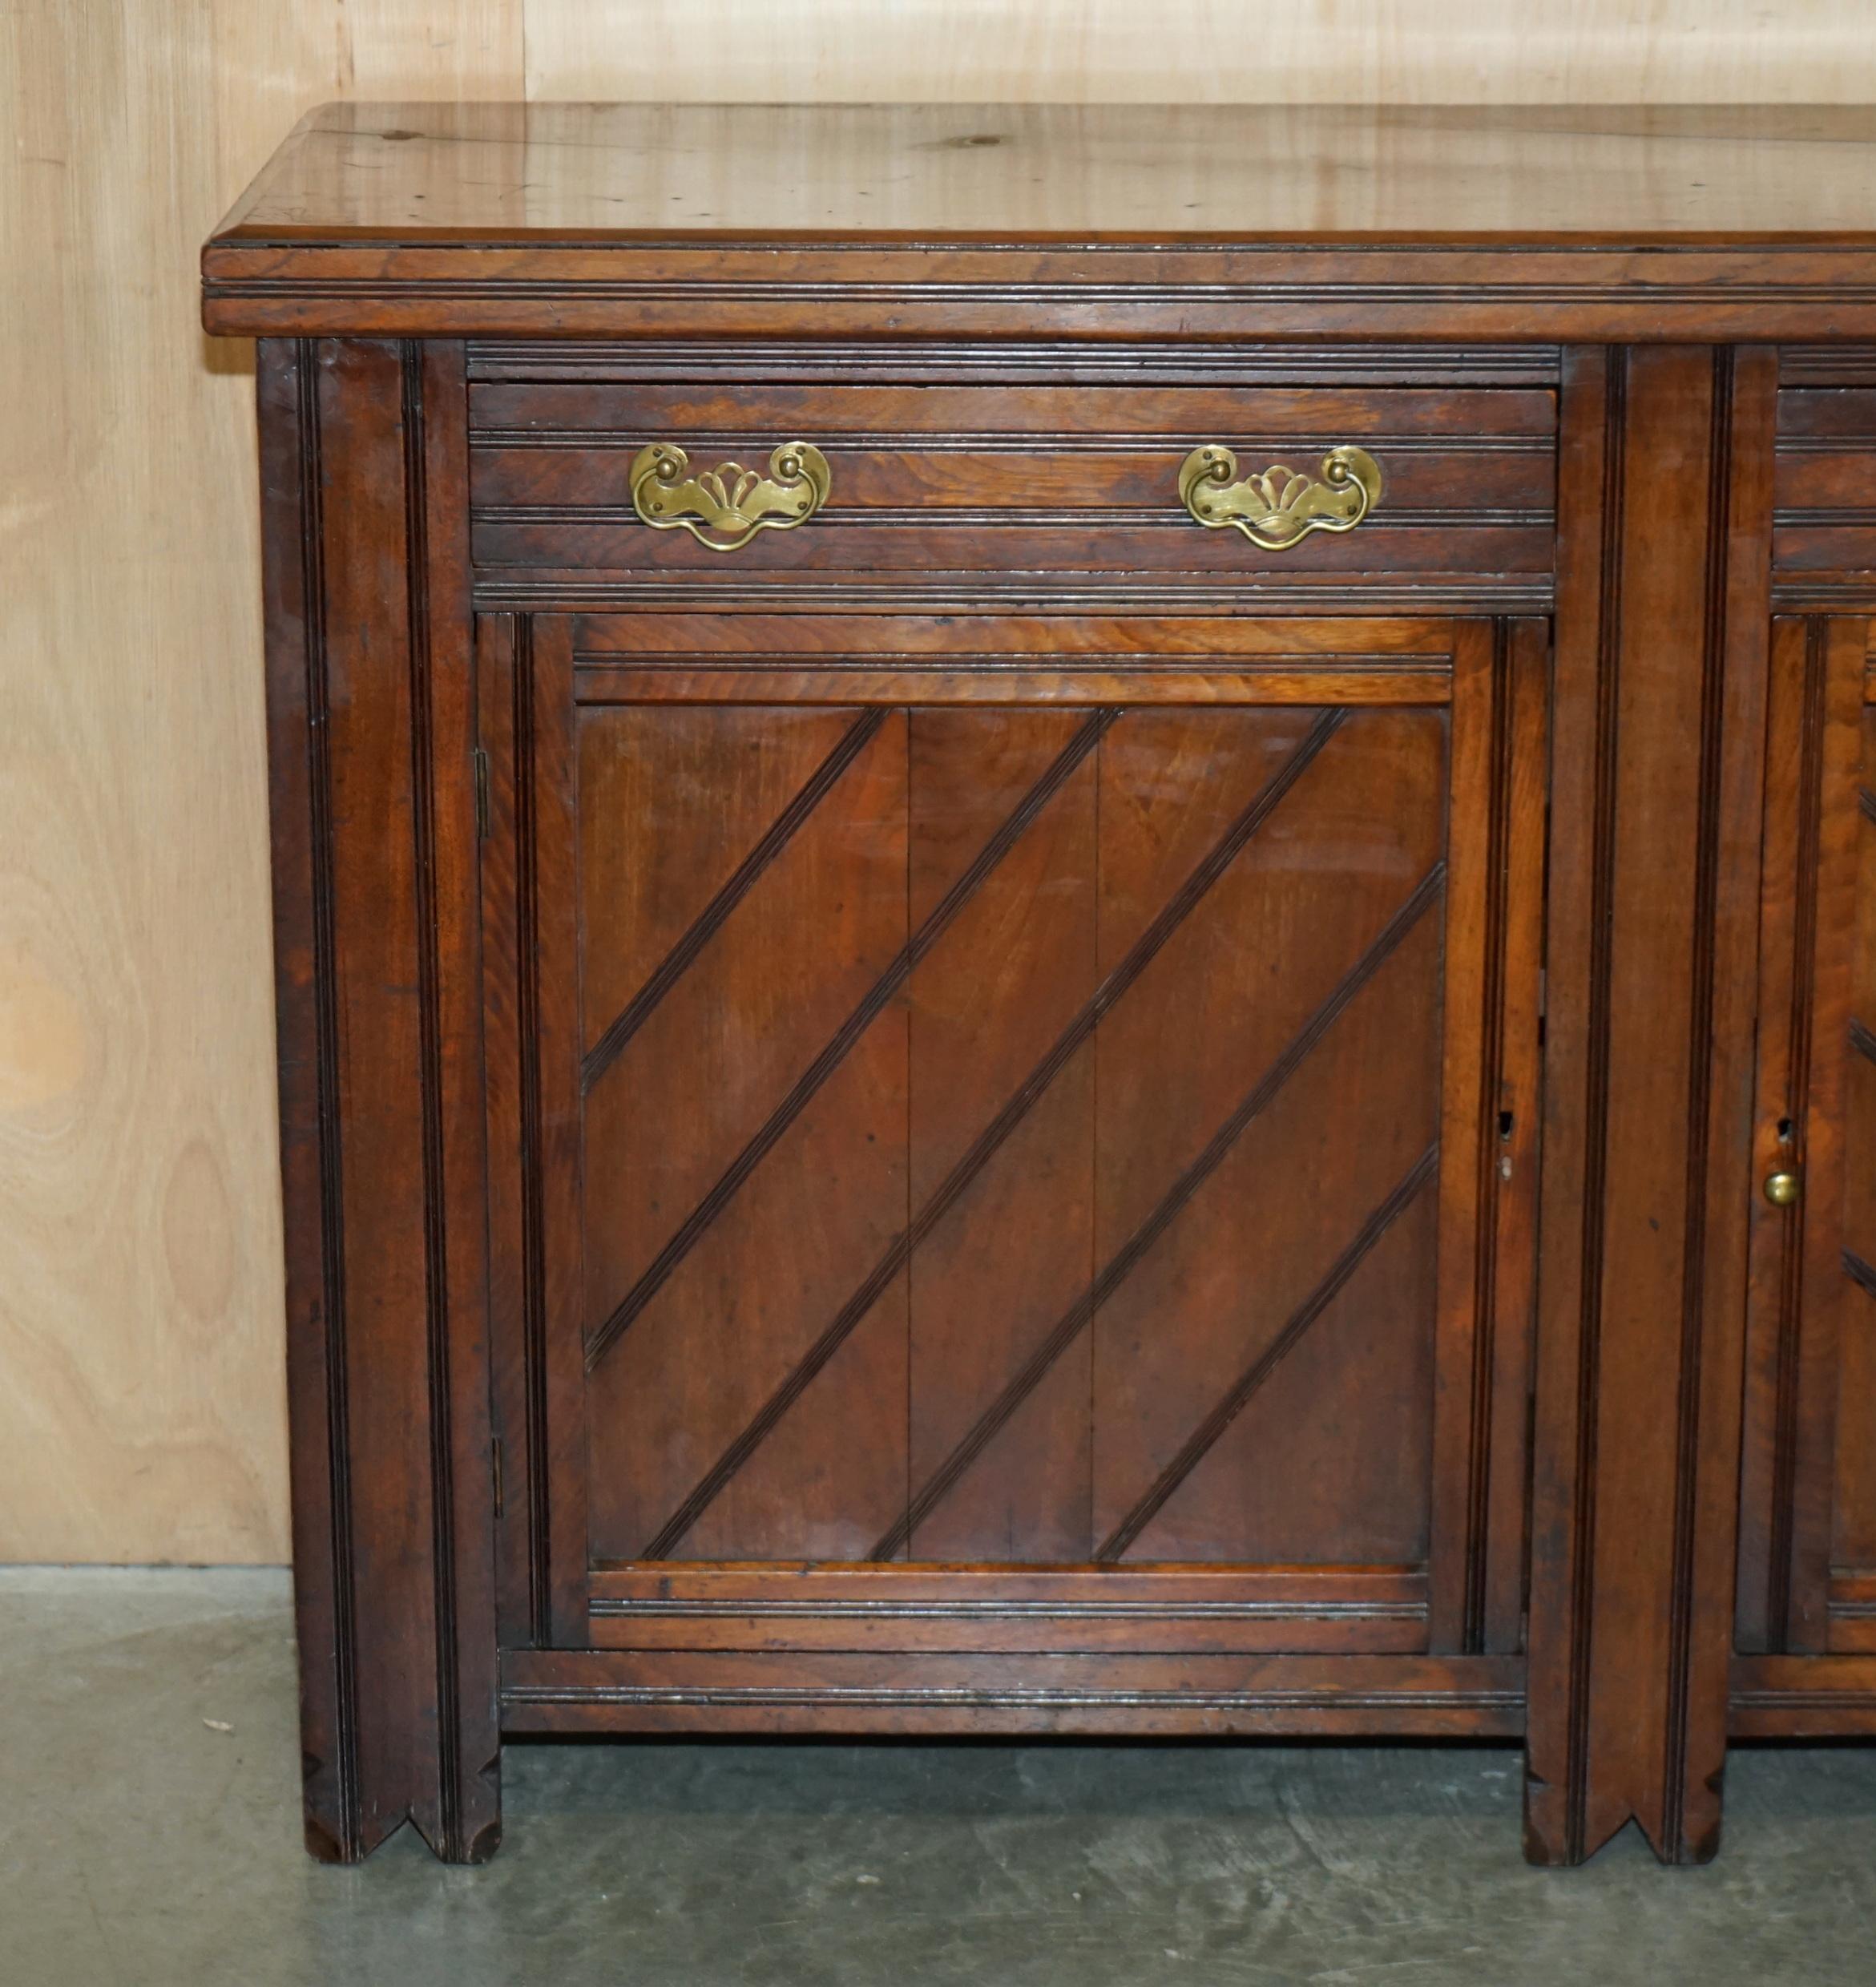 High Victorian ANTIQUE ENGLISH COUNTRY OAK CiRCA 1880 VICTORIAN SIDEBOARD BASE WITH DRAWERS For Sale